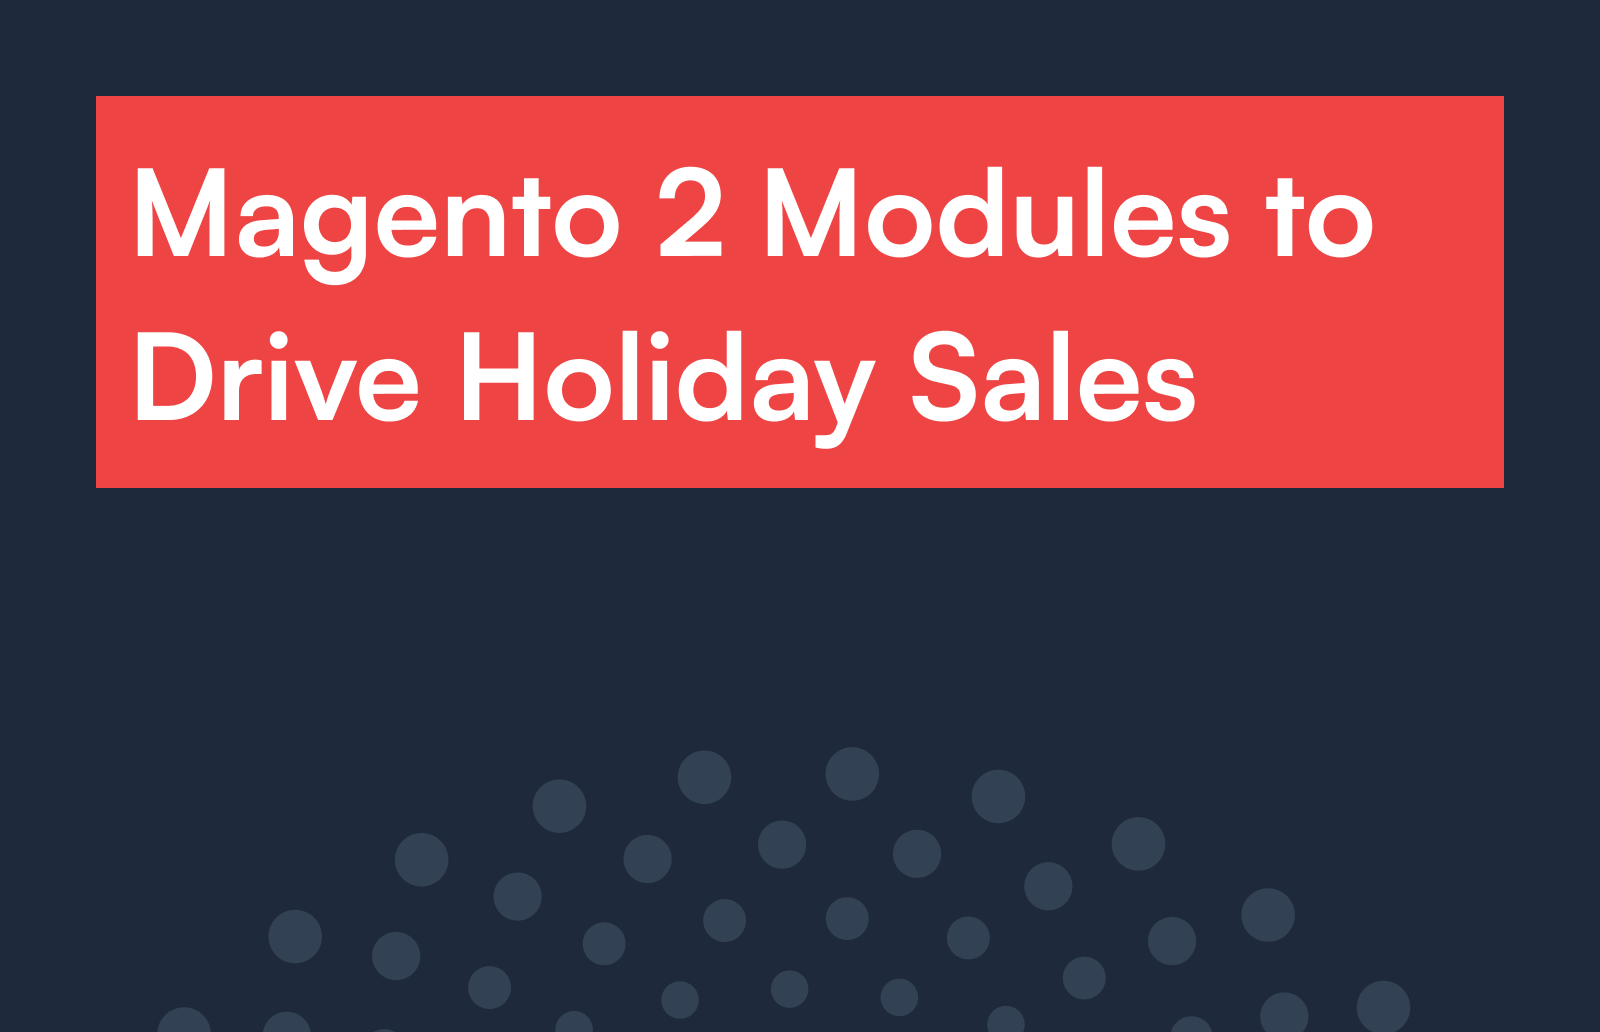 Magento 2 Modules to Drive Holiday Sales